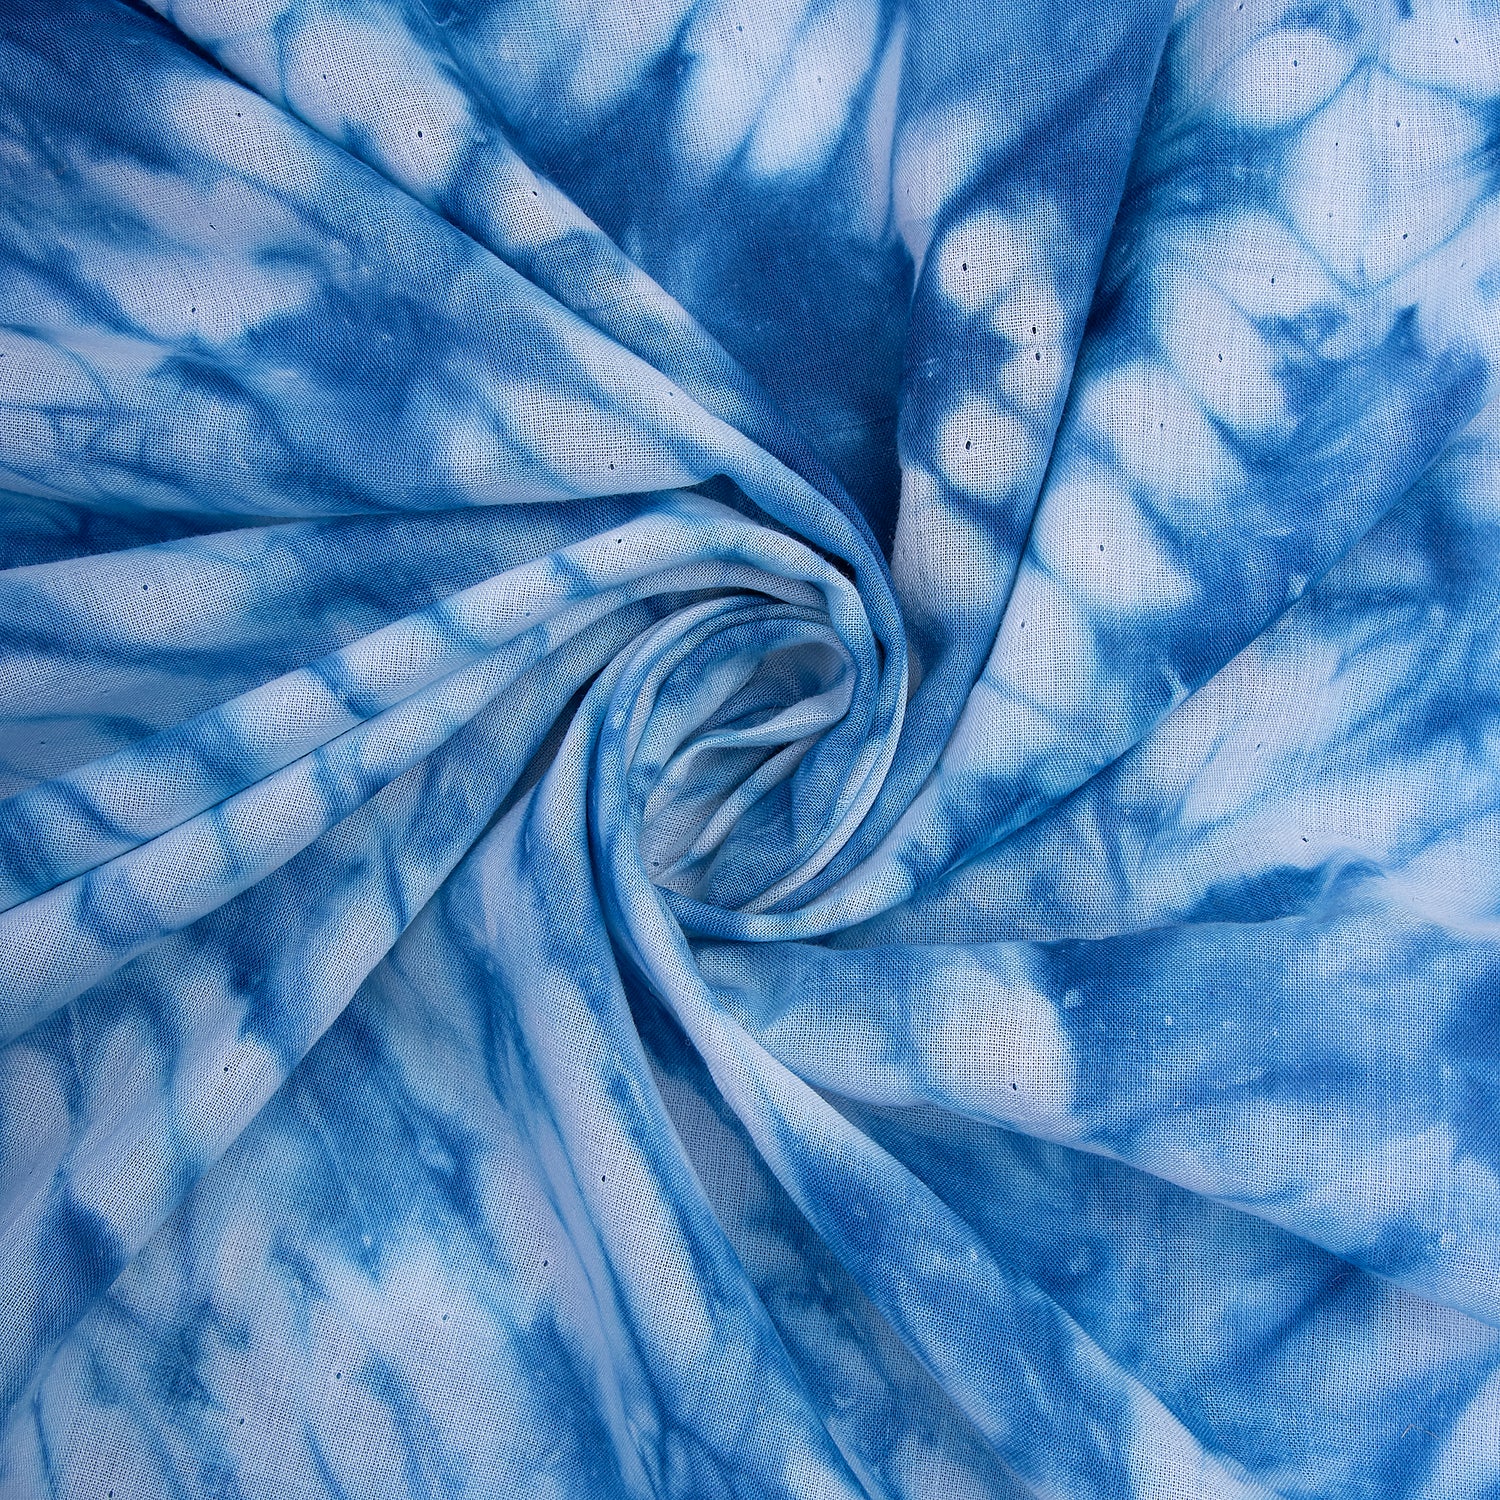 Hand Dyed Cotton Fabric Misty Waters Tie Dye